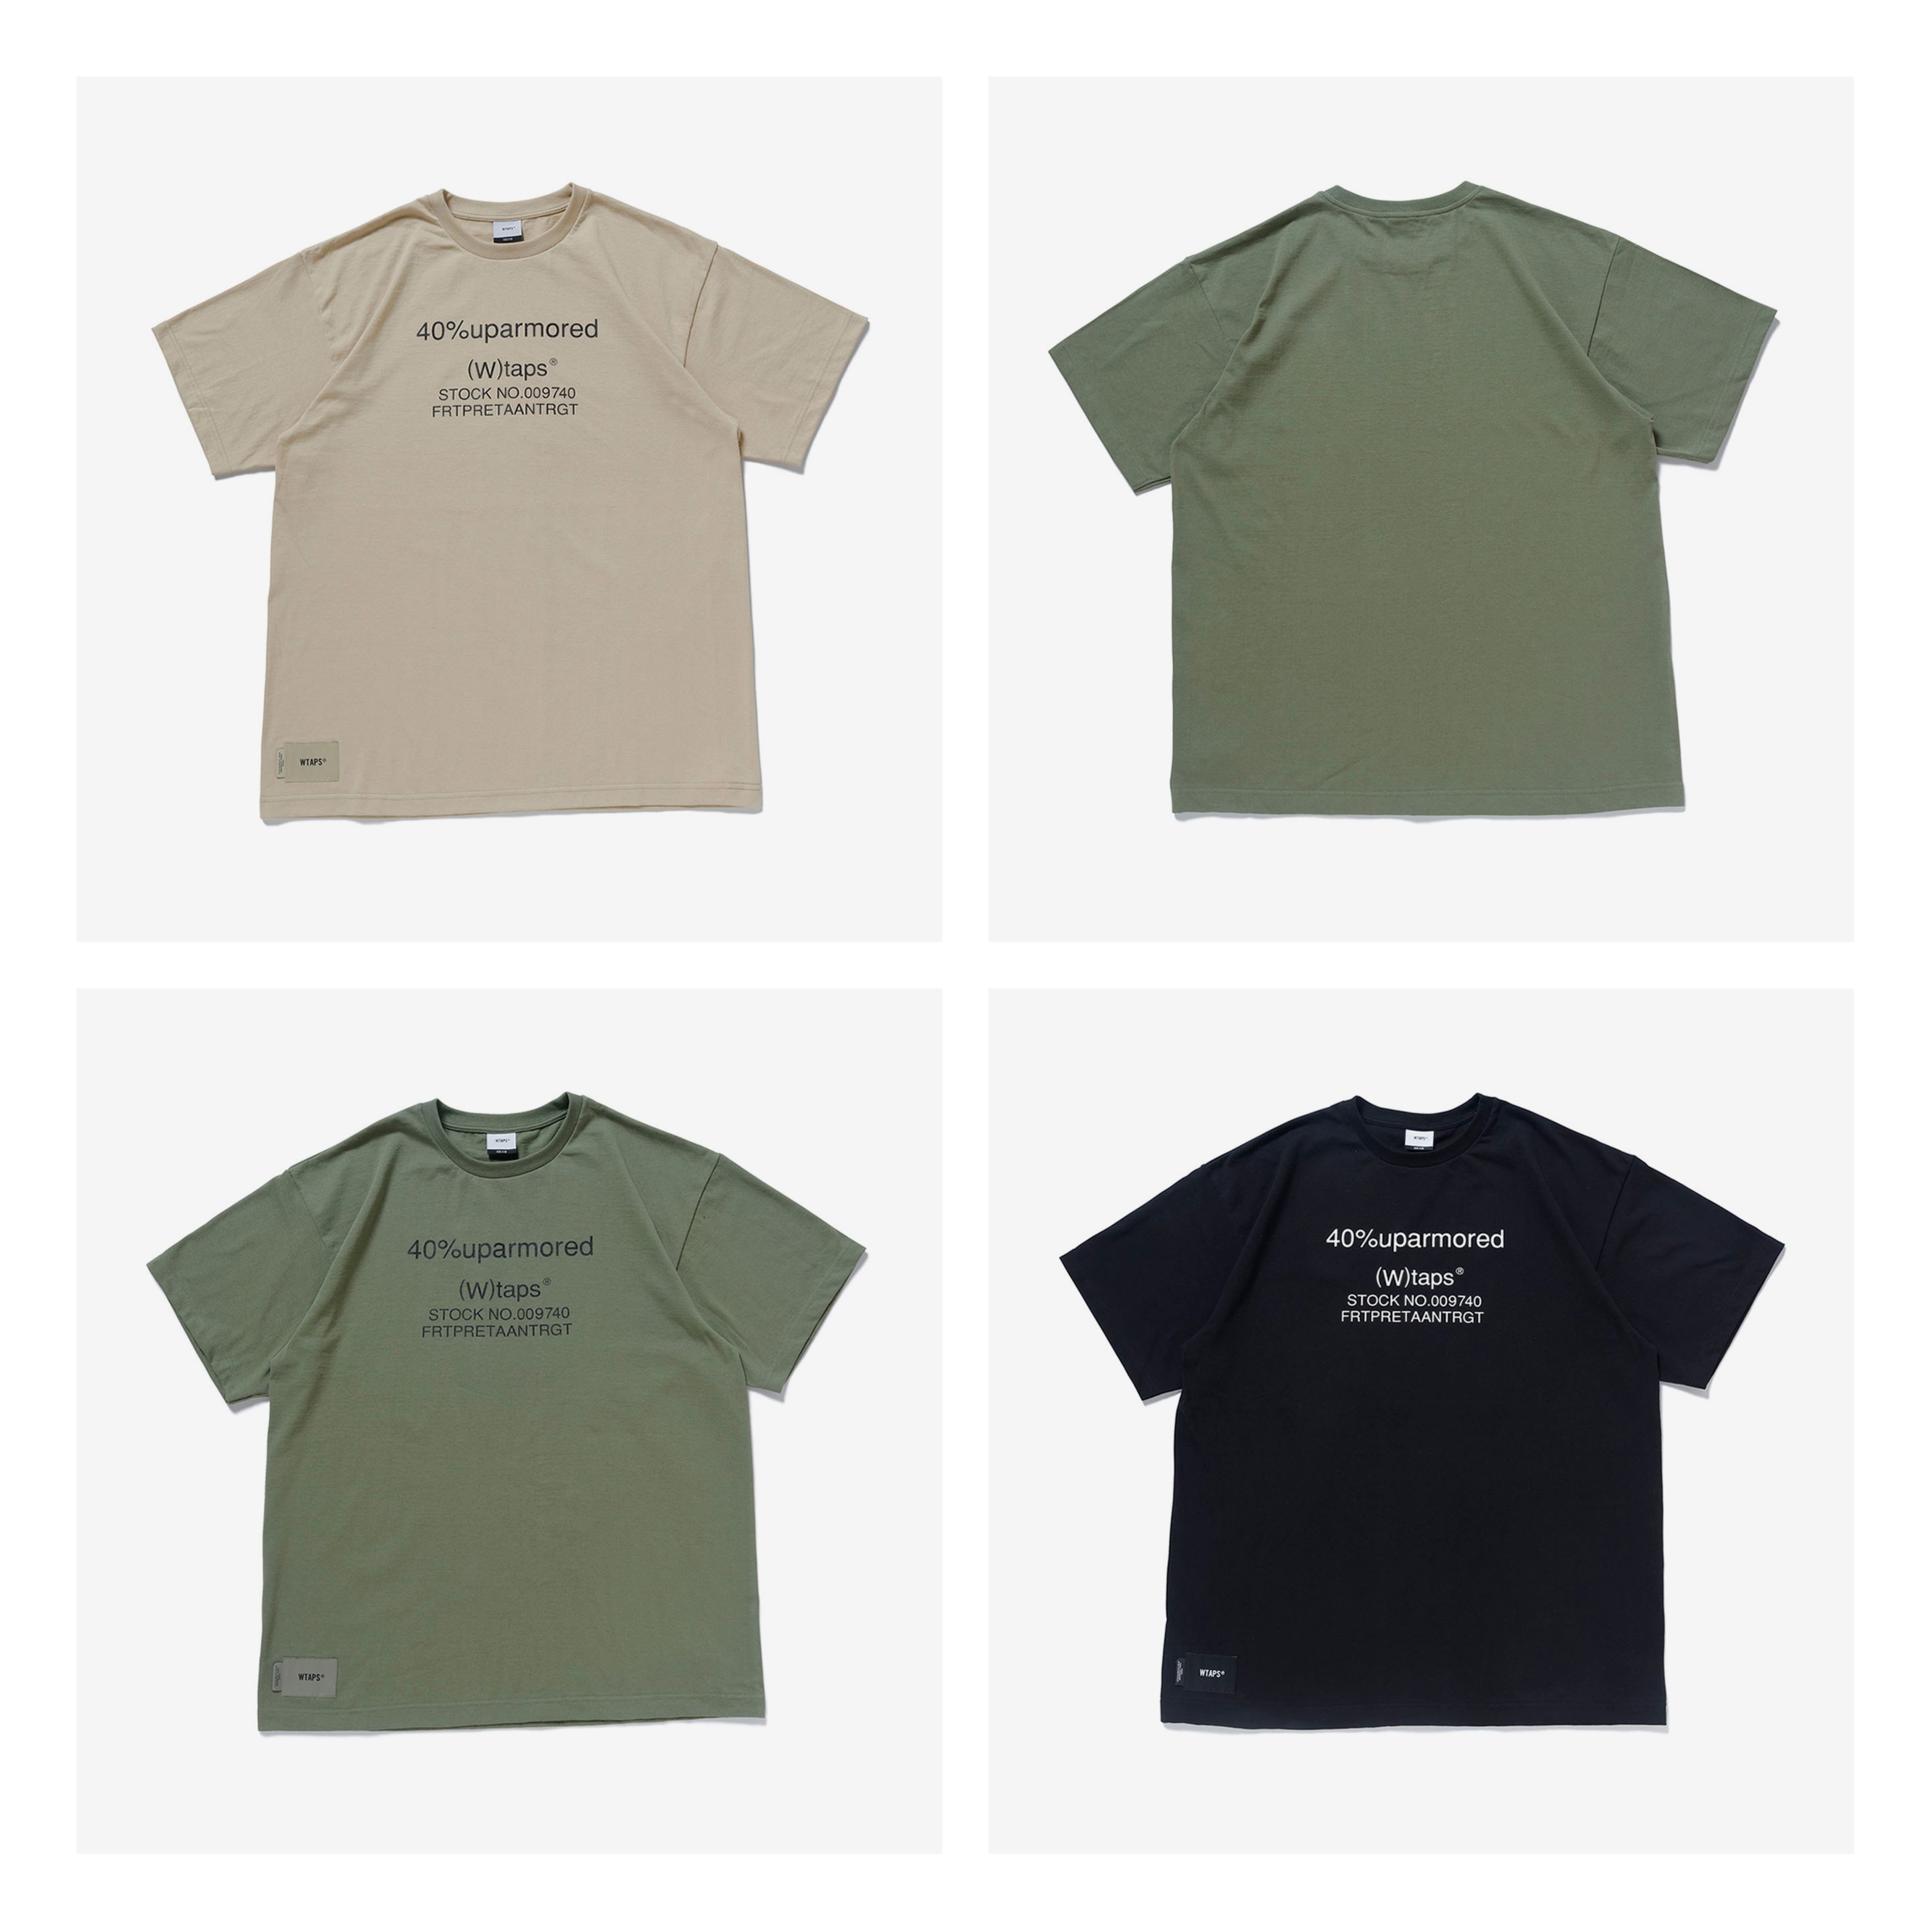 WTAPS 40PCT UPARMORED SS COTTON 黒XL-